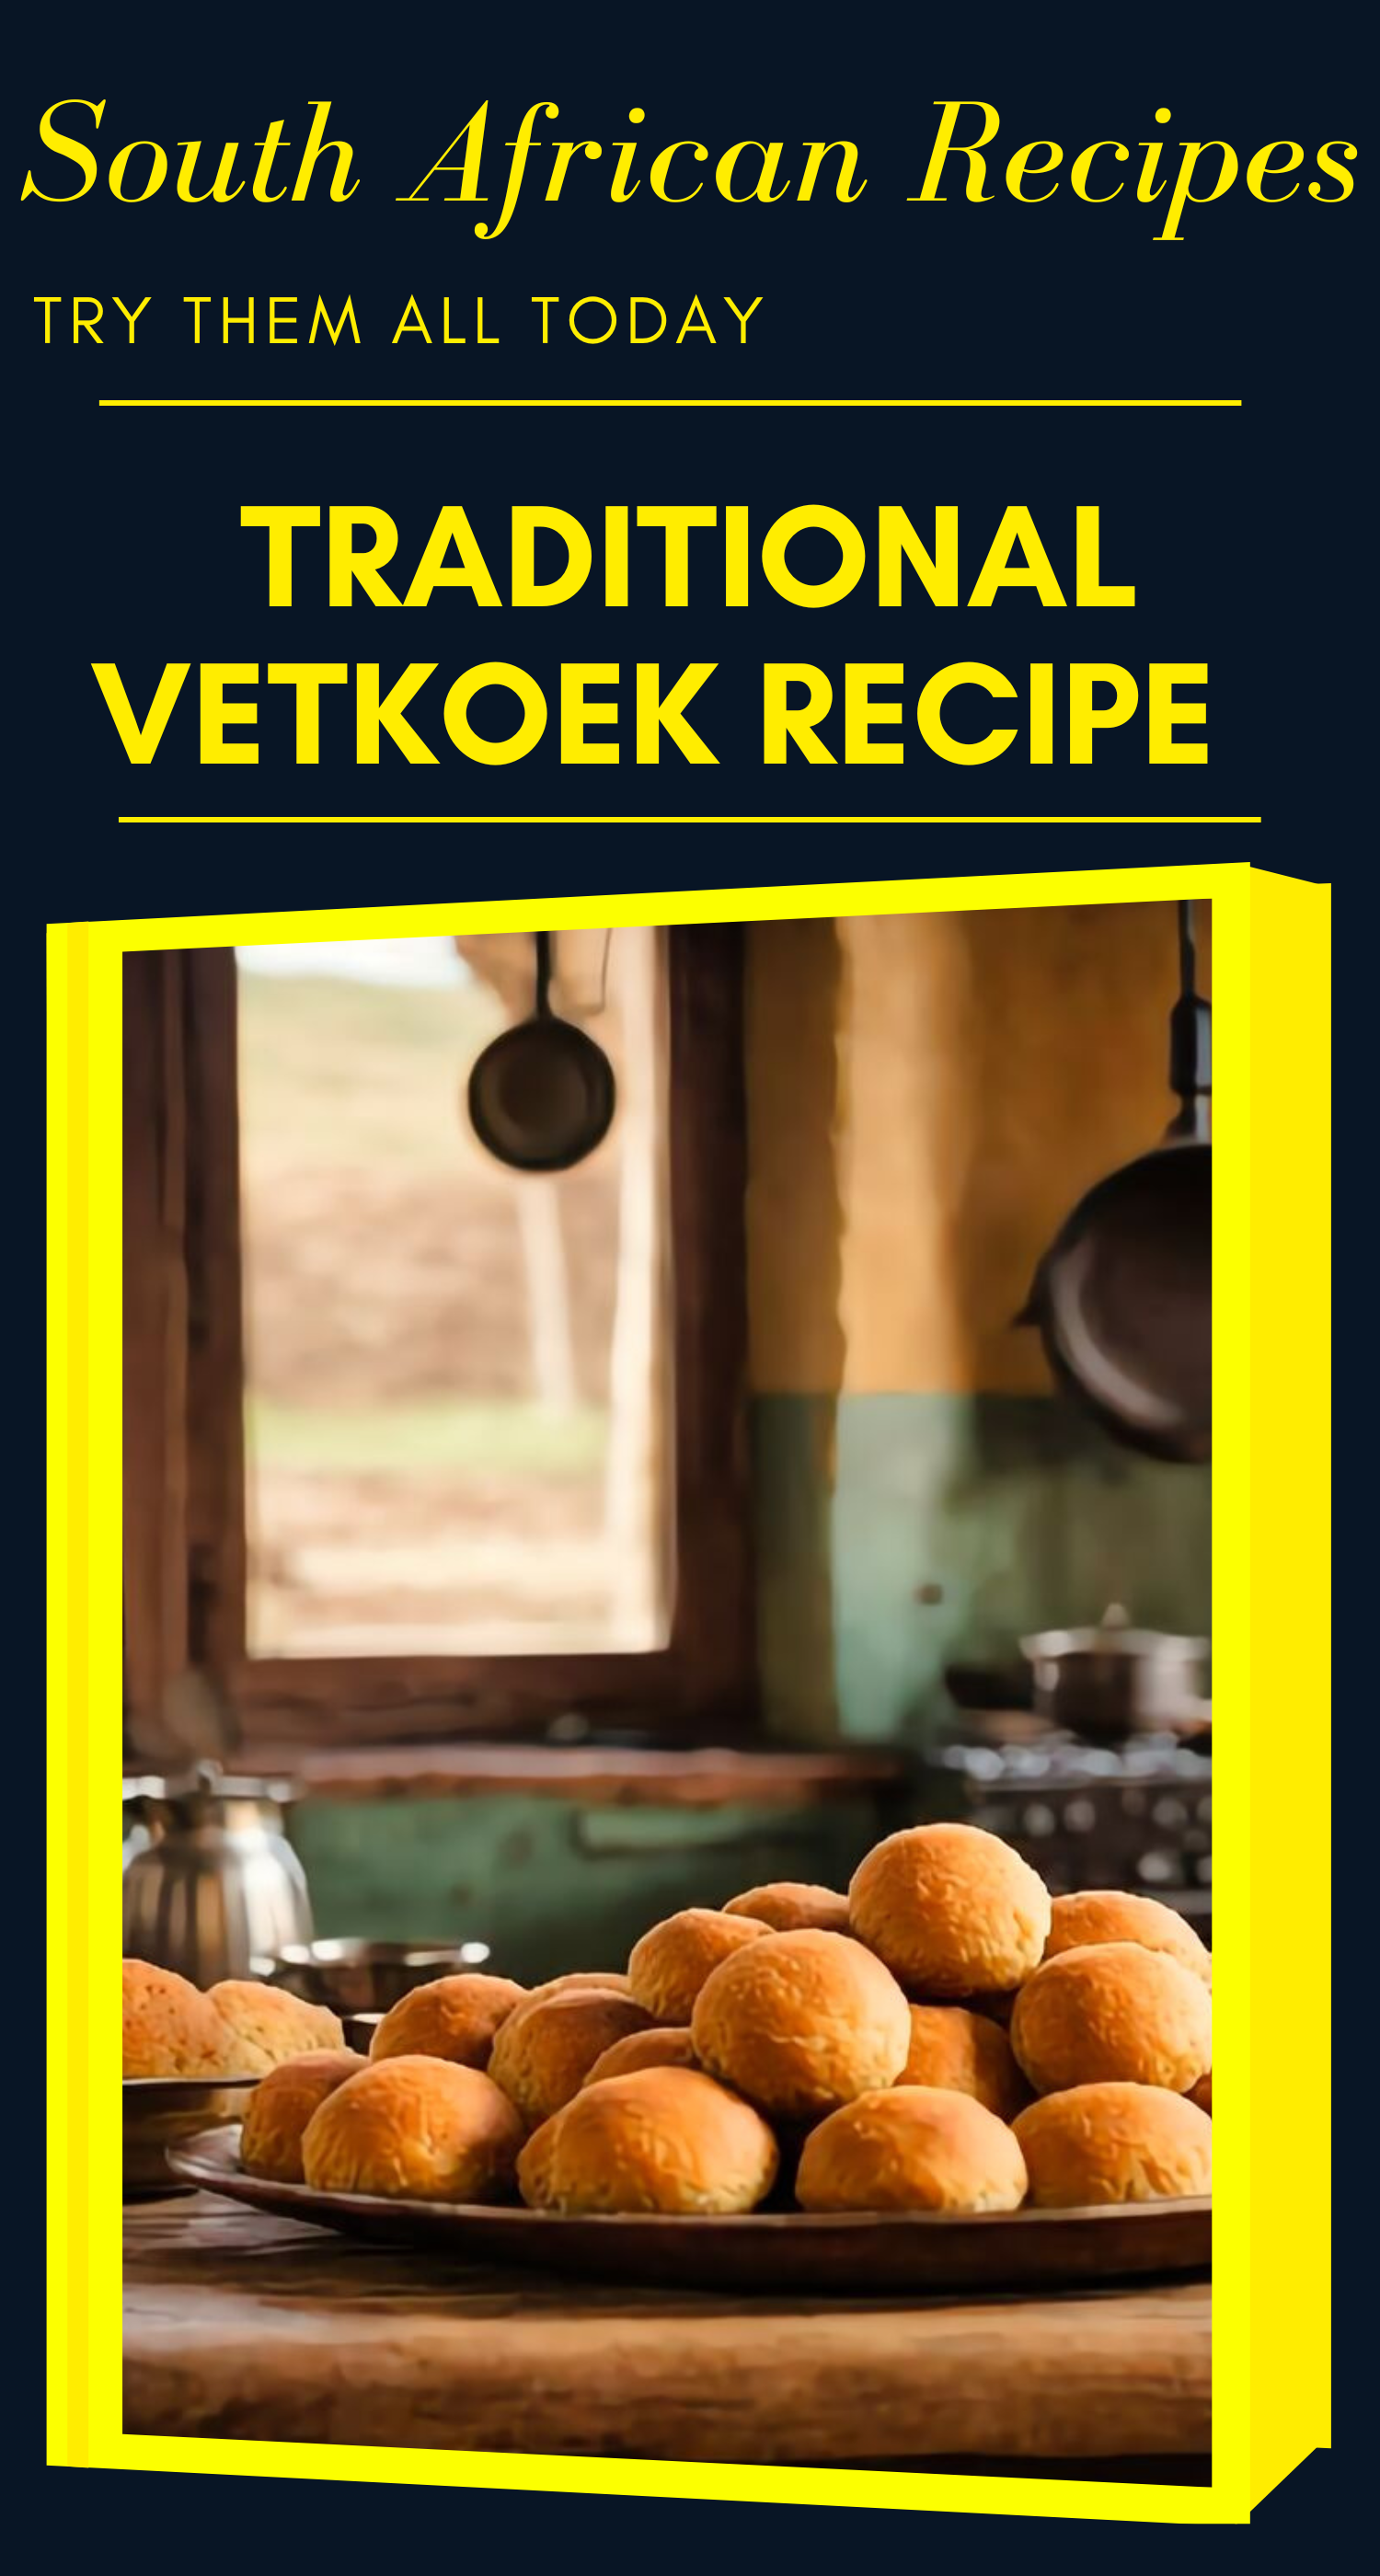 South African Traditional Vetkoek Recipe